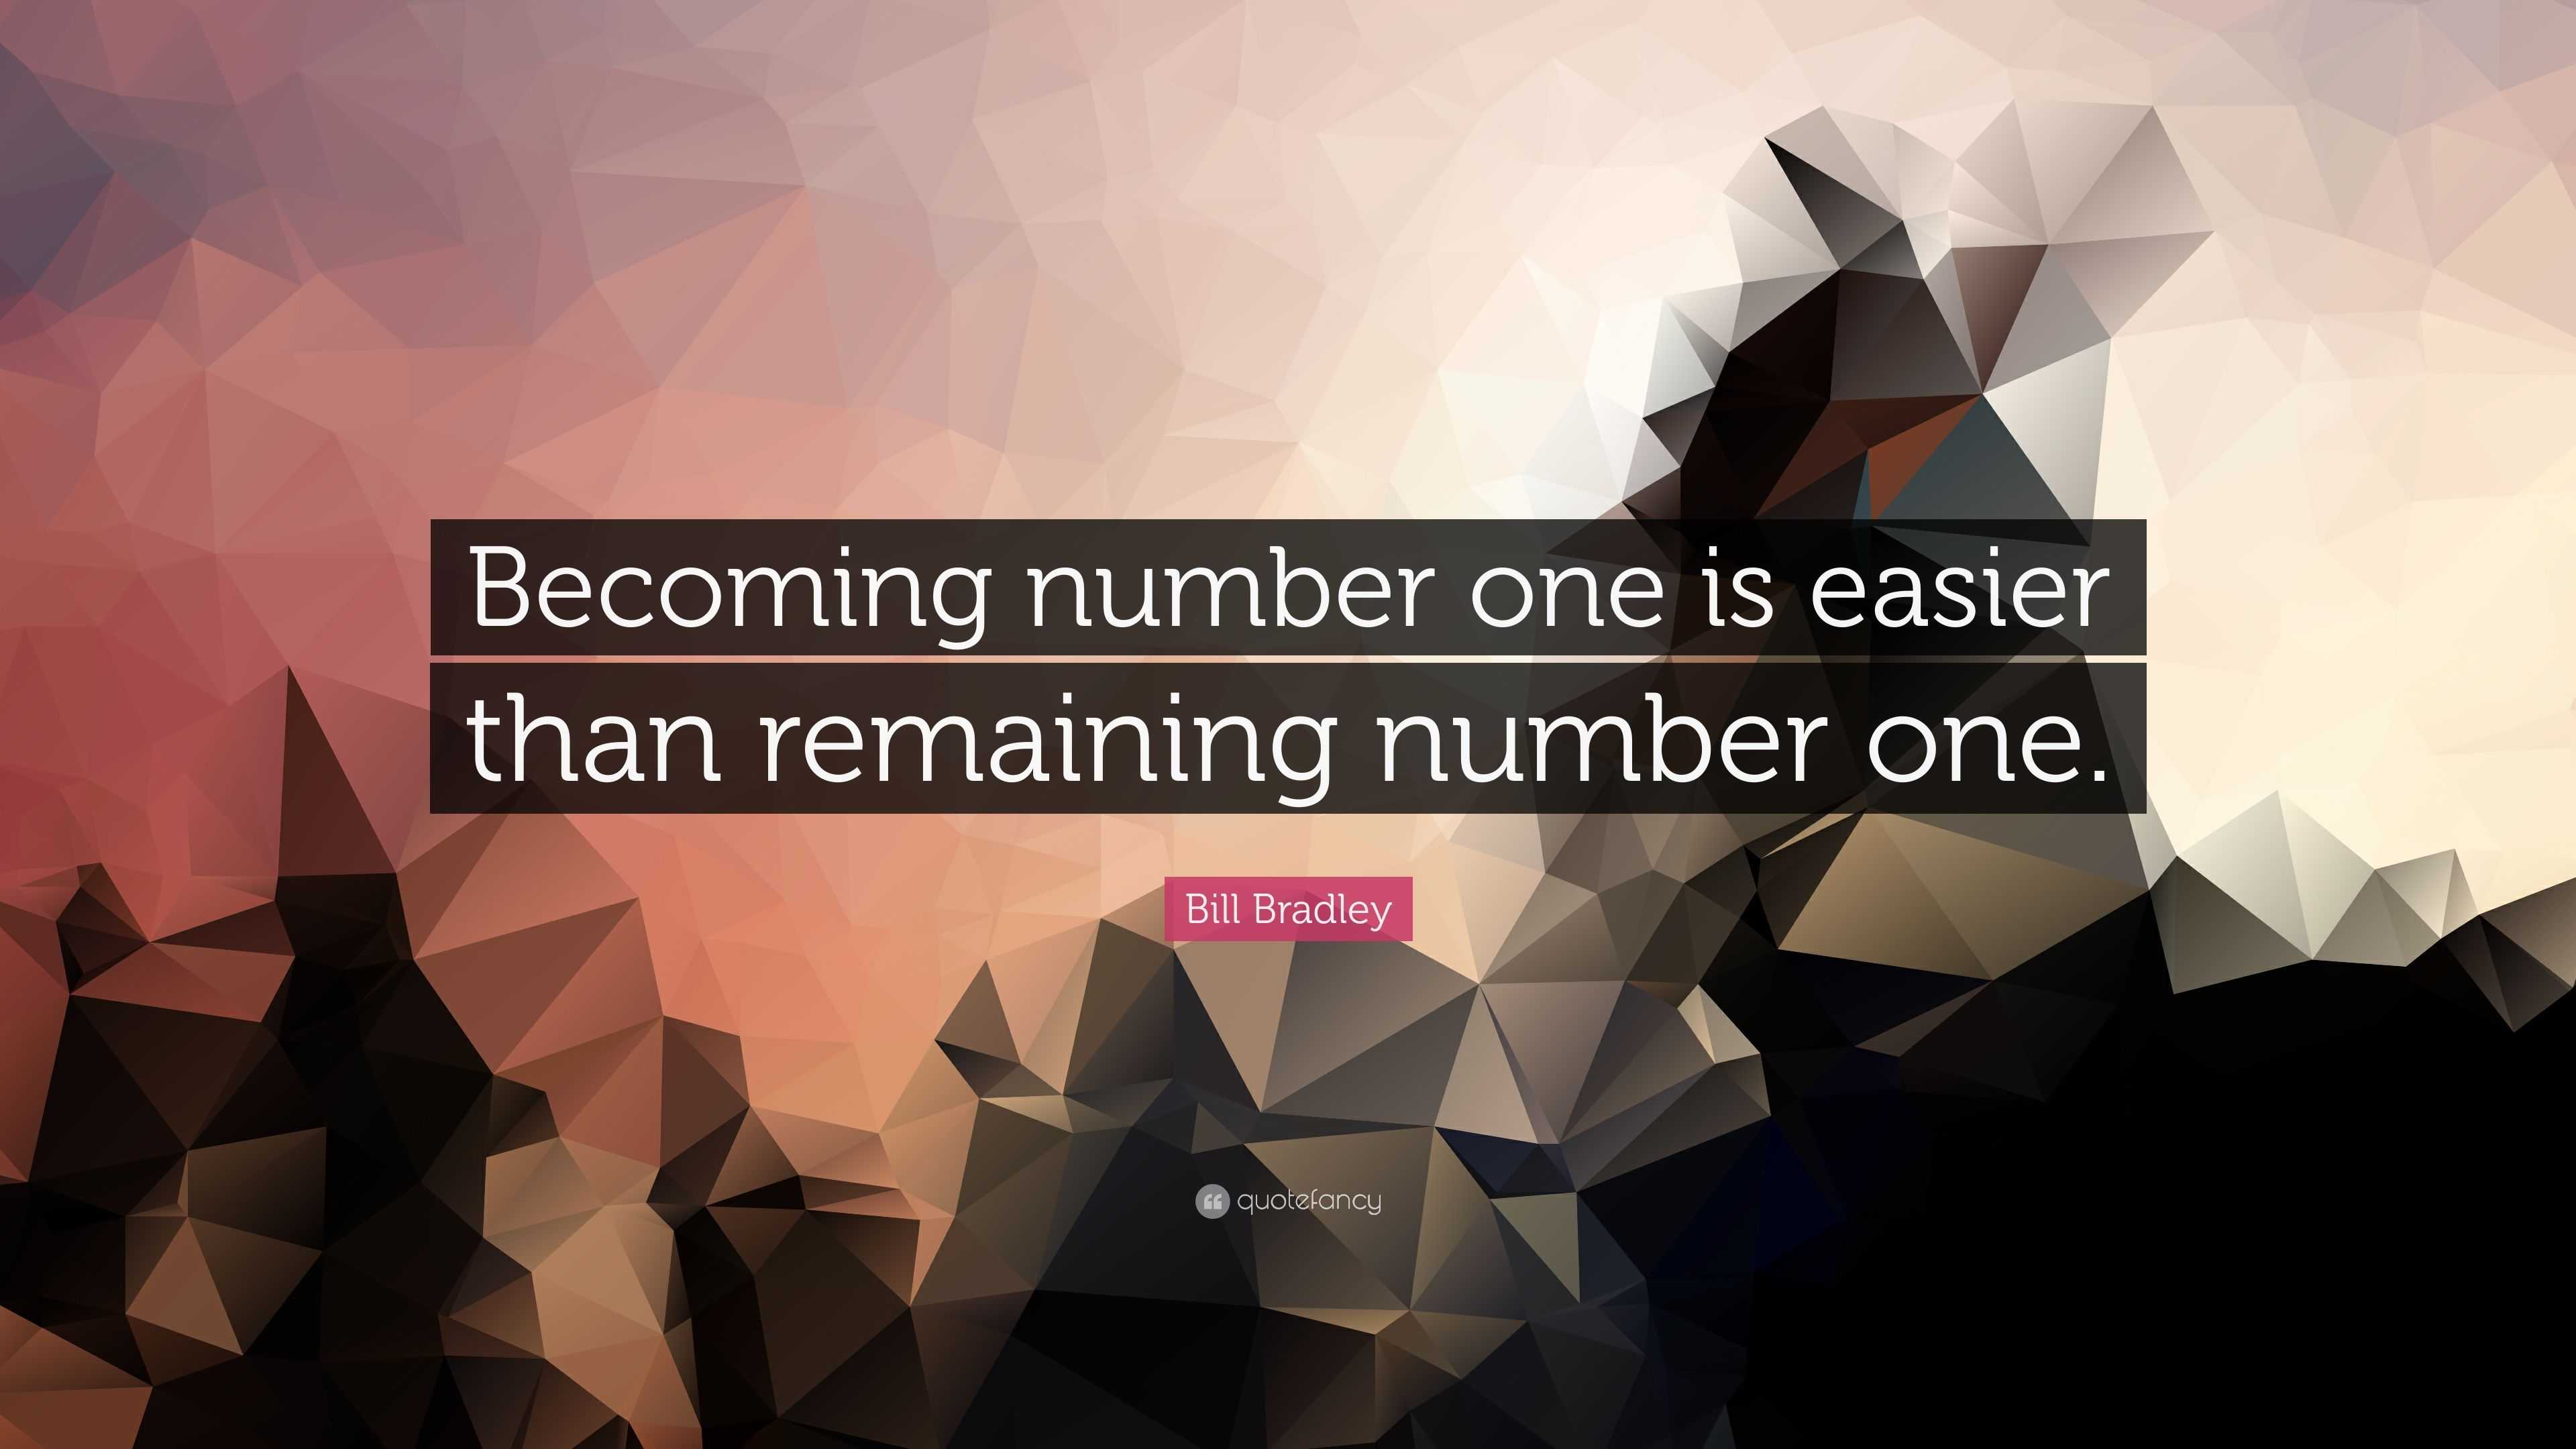 Bill Bradley Quote: “Becoming number one is easier than remaining